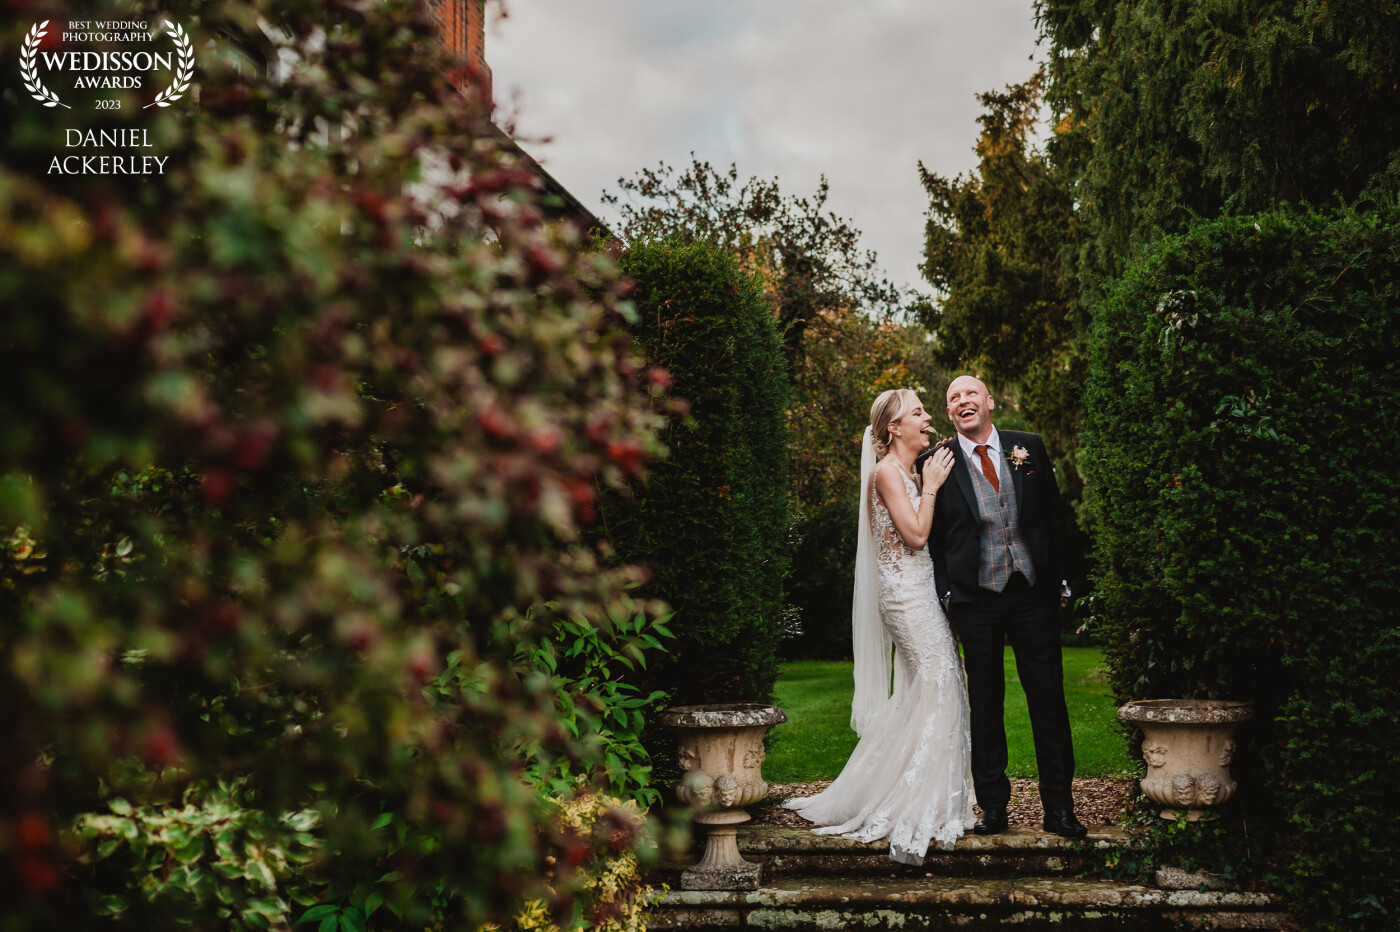 Megan and Dan got married at the ever beautiful Swynford Manor, they were so excited to do the mighty deed and become husband and wife, so we went for a walk in the grounds and I got them to tell each other jokes resulting in this really lovely candid image!